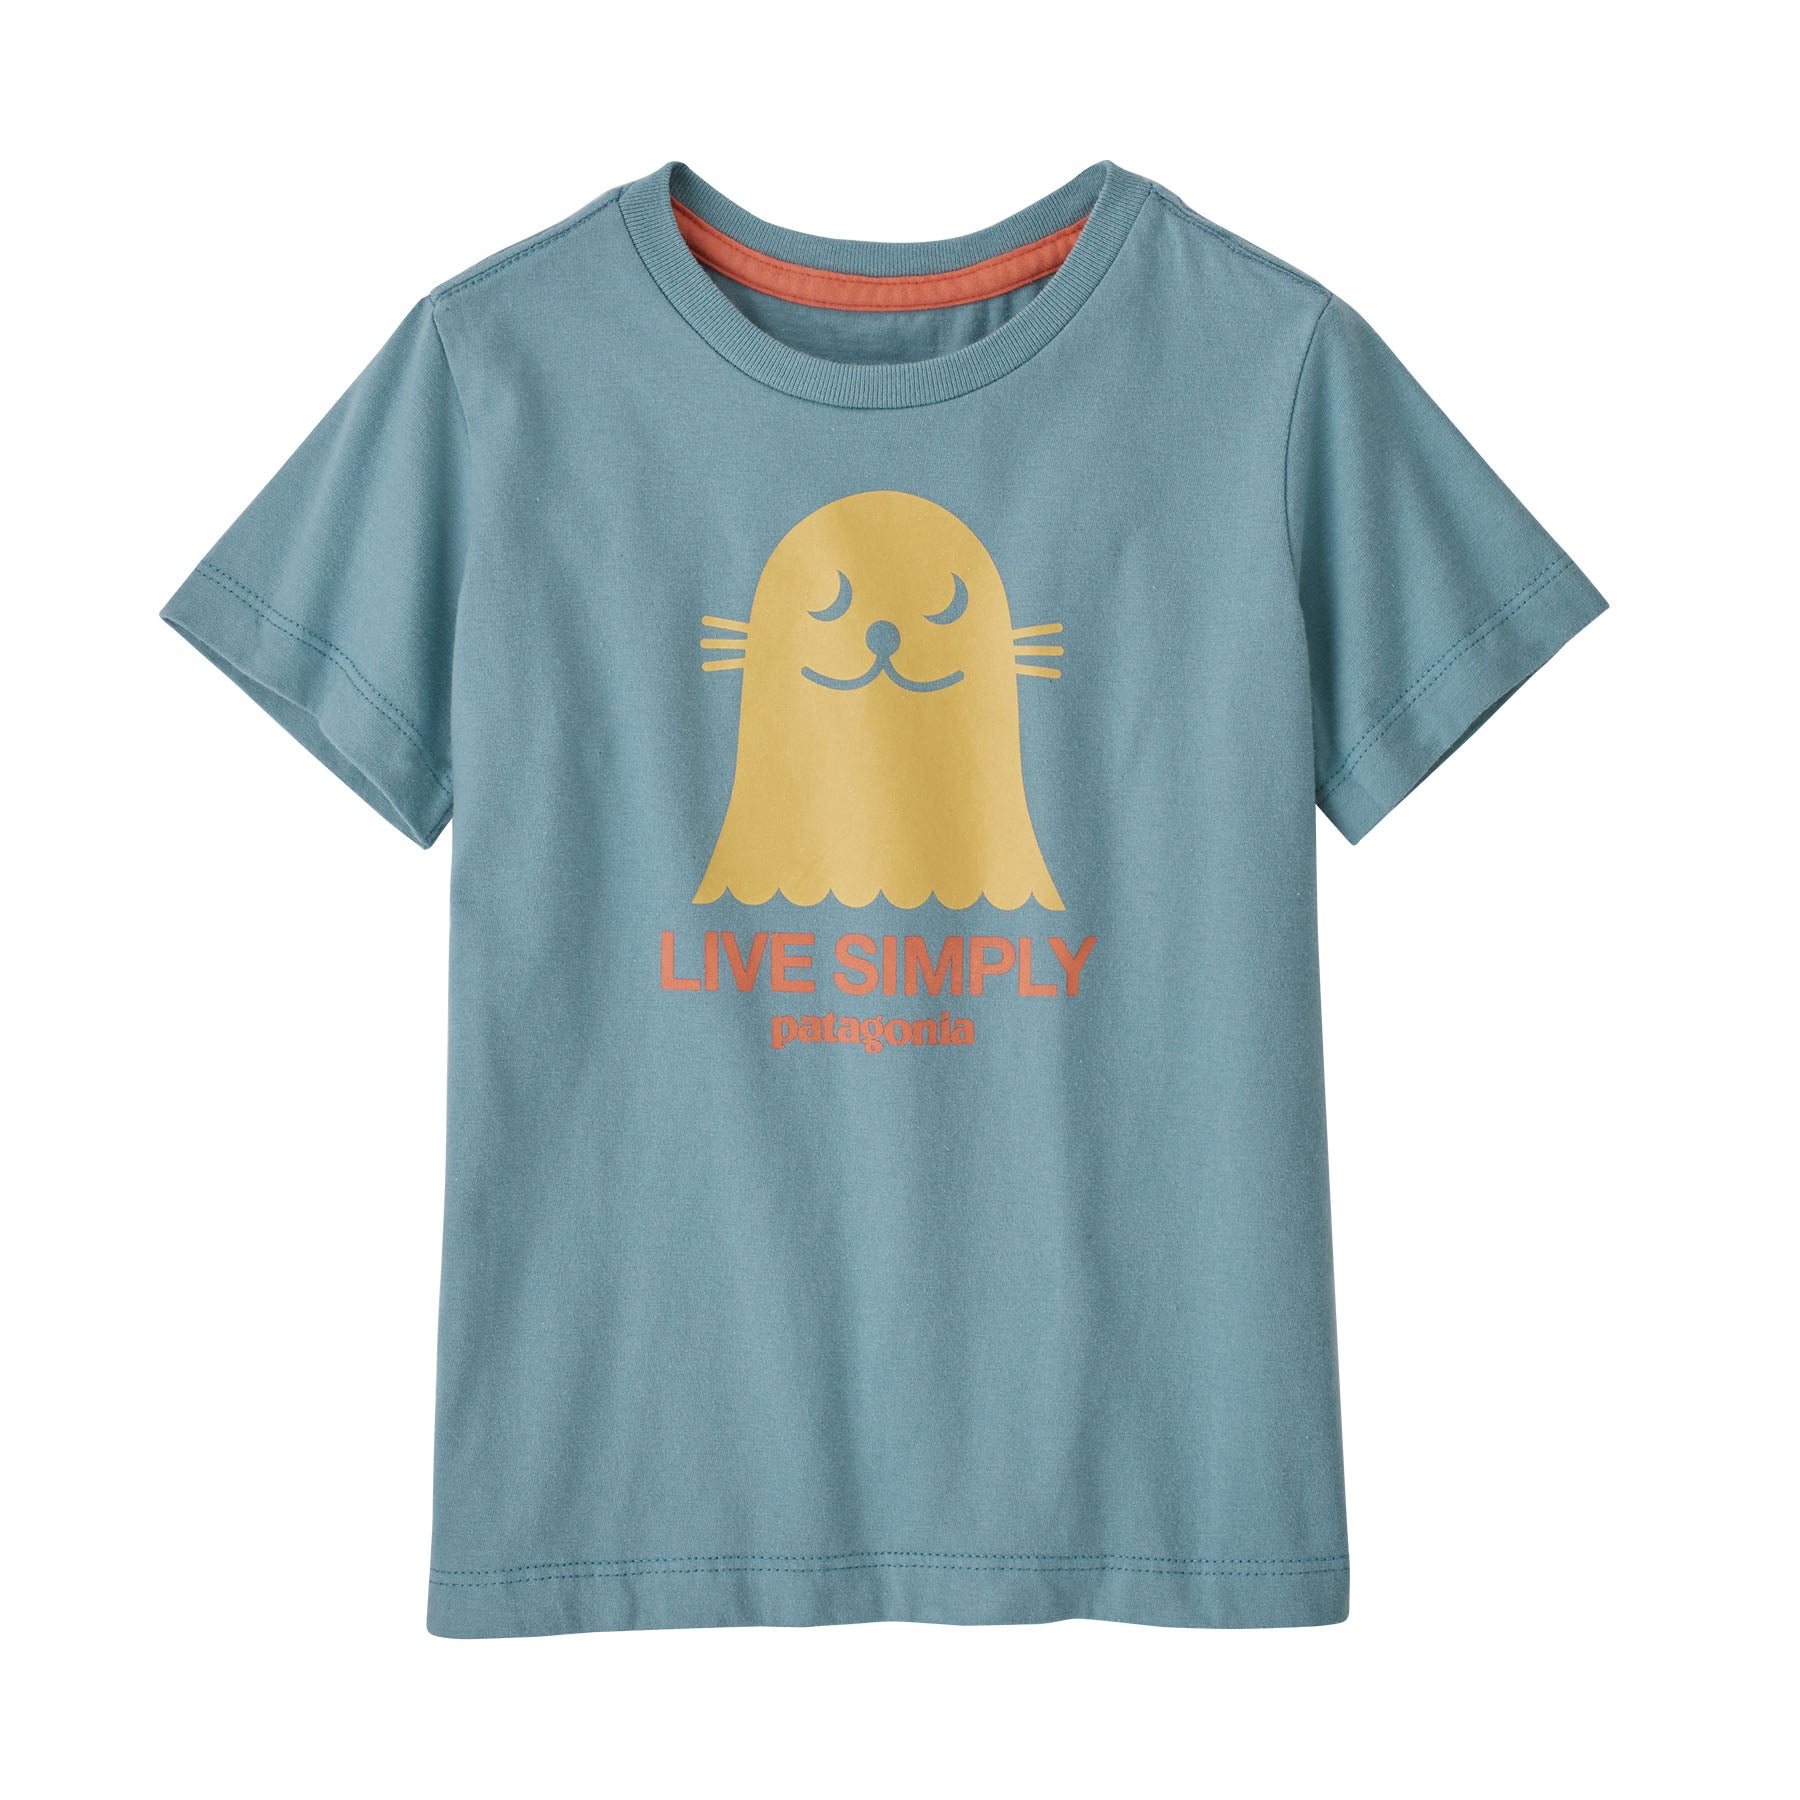 Patagonia Baby Regenerative Organic Certified™ Cotton Live Simply® T-Shirt - Spring 2022